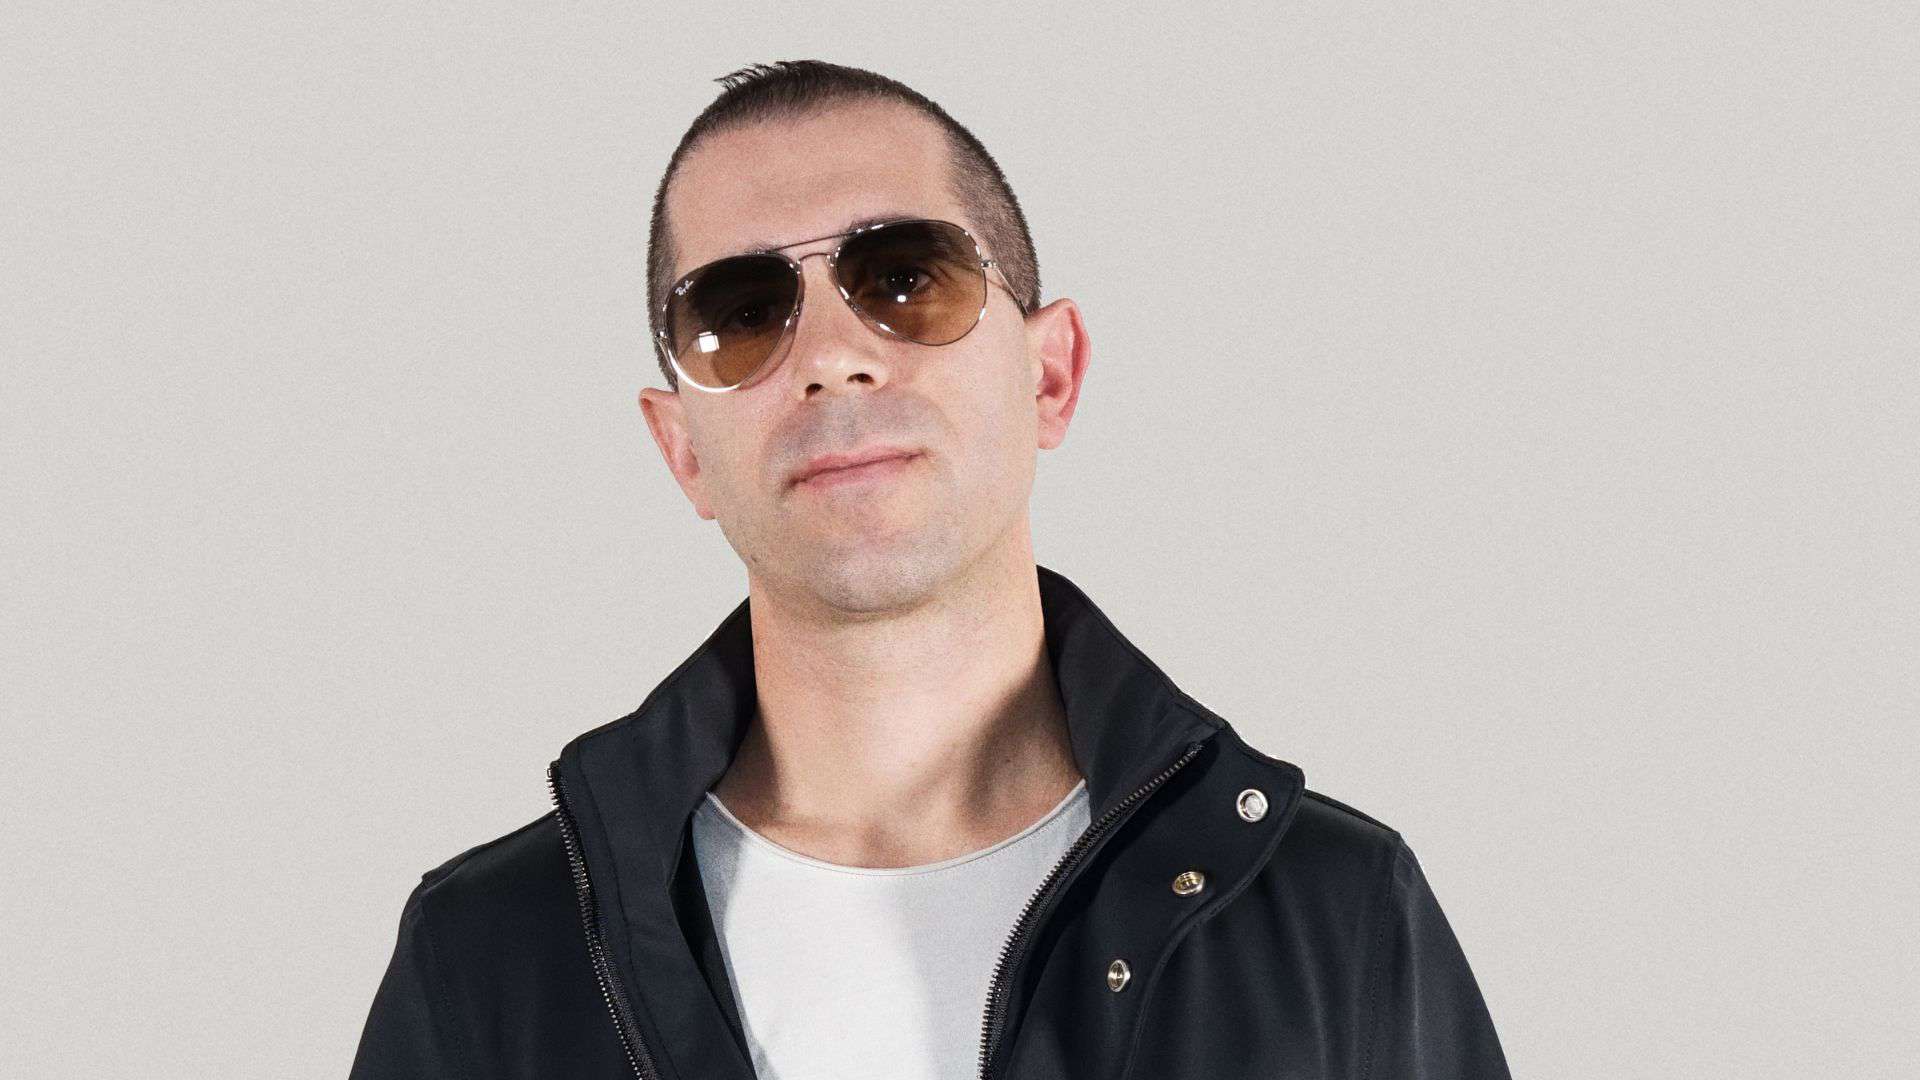 Giuseppe Ottaviani opens up about main inspirations, his ‘Airwave’ remix and more: Interview